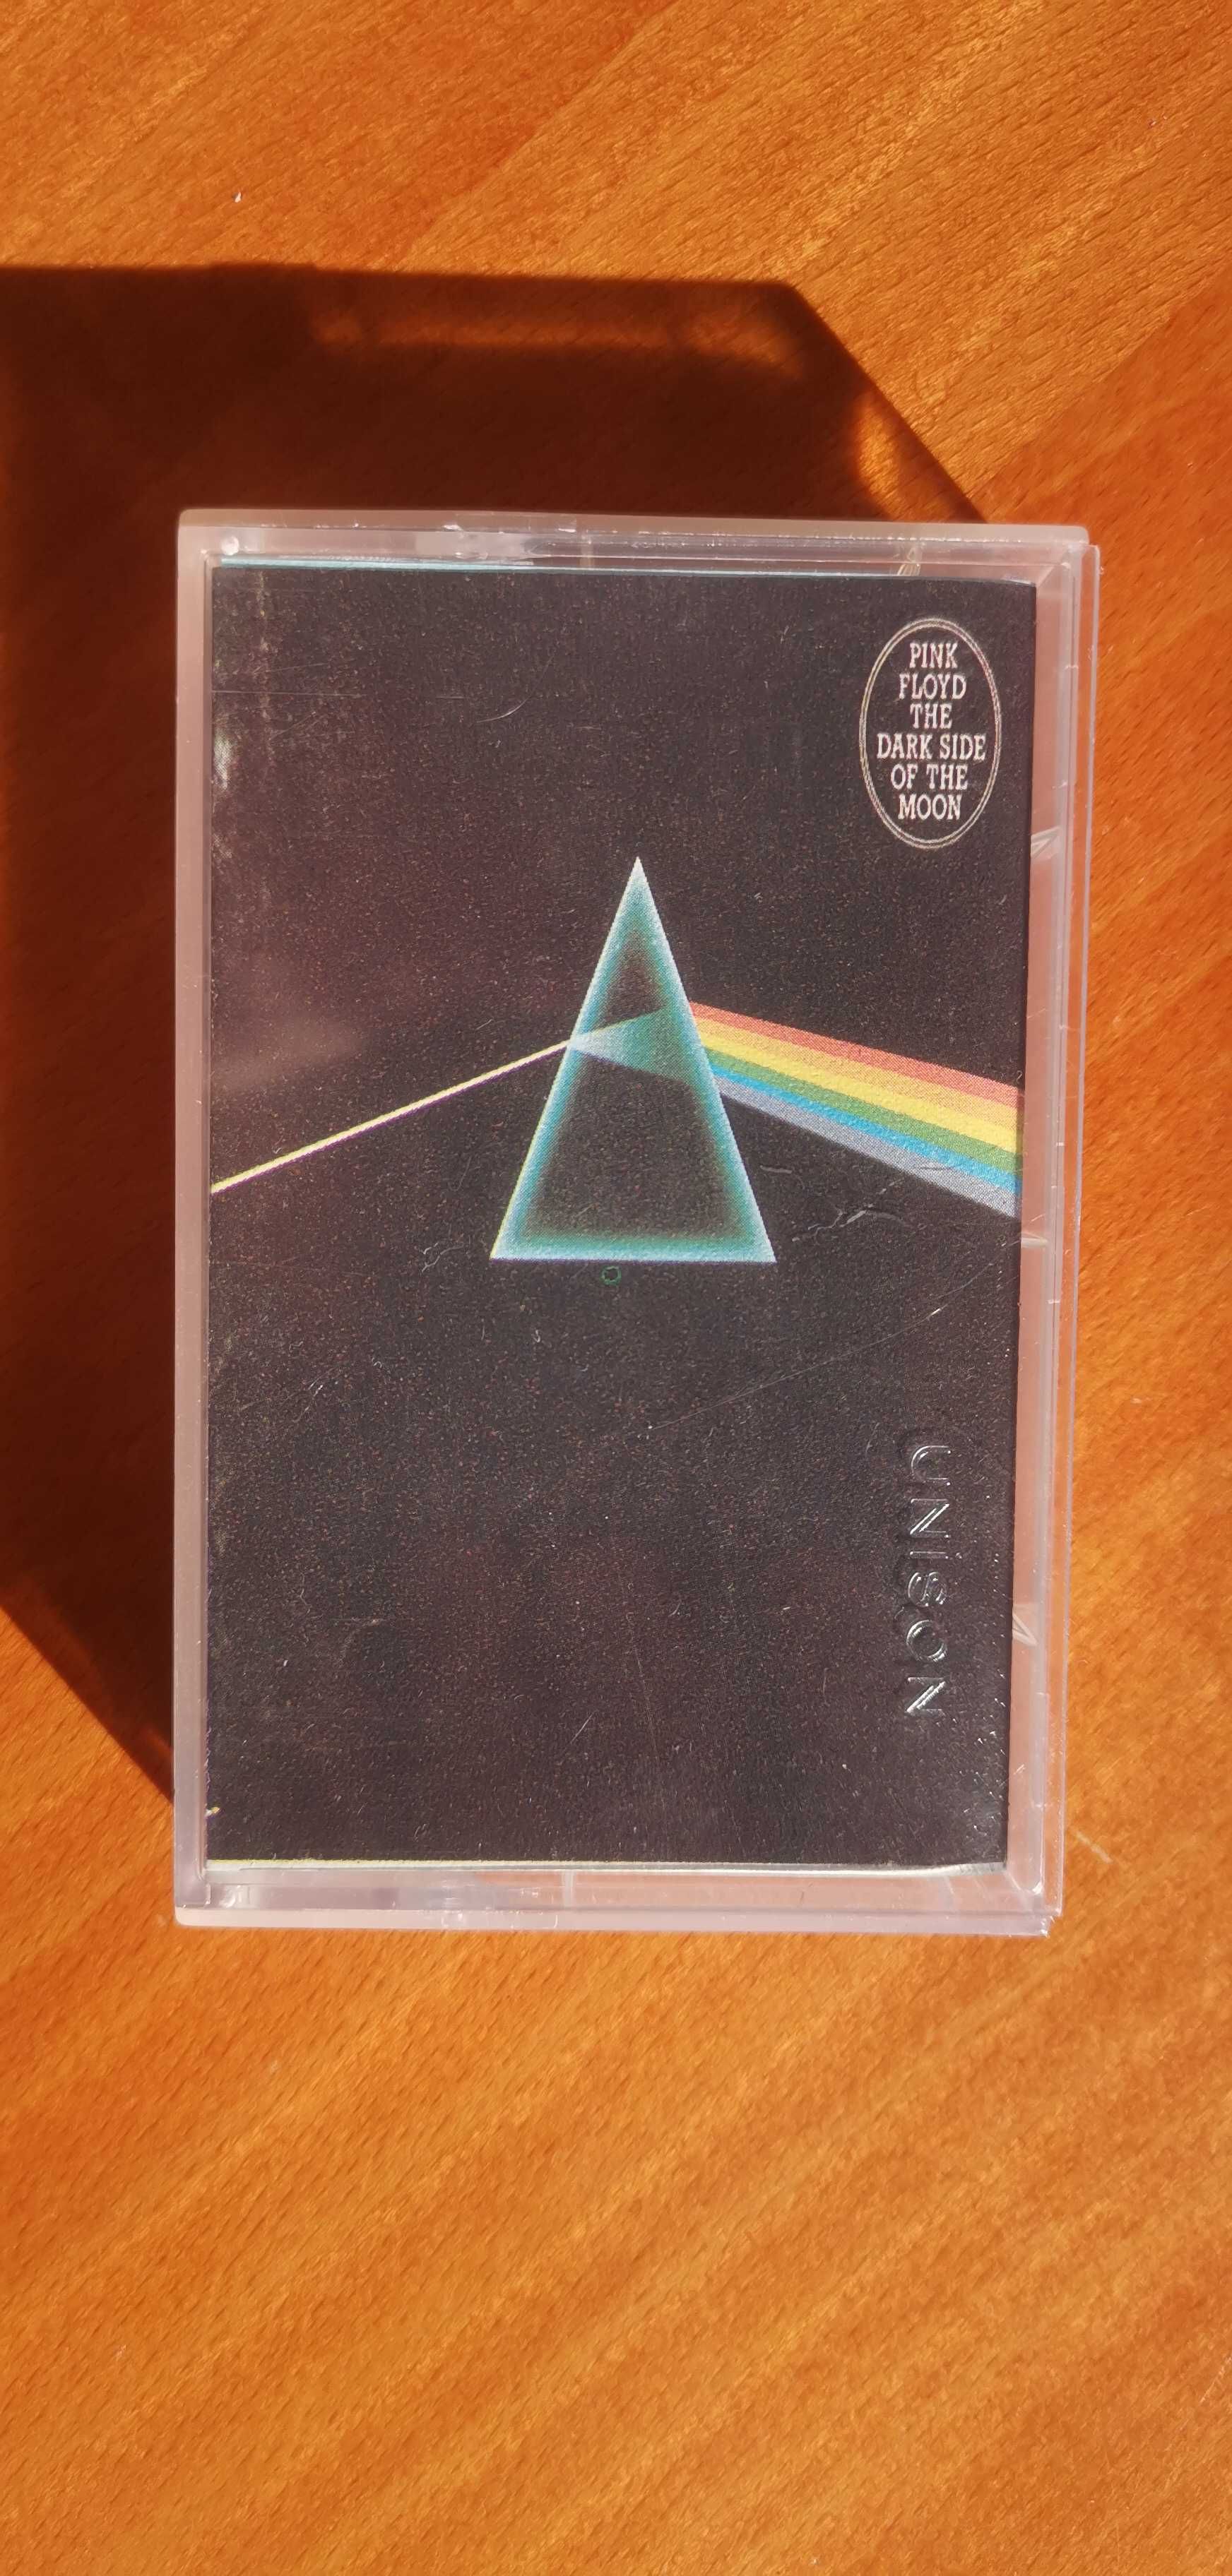 Pink Floid - Dark side of the Moon